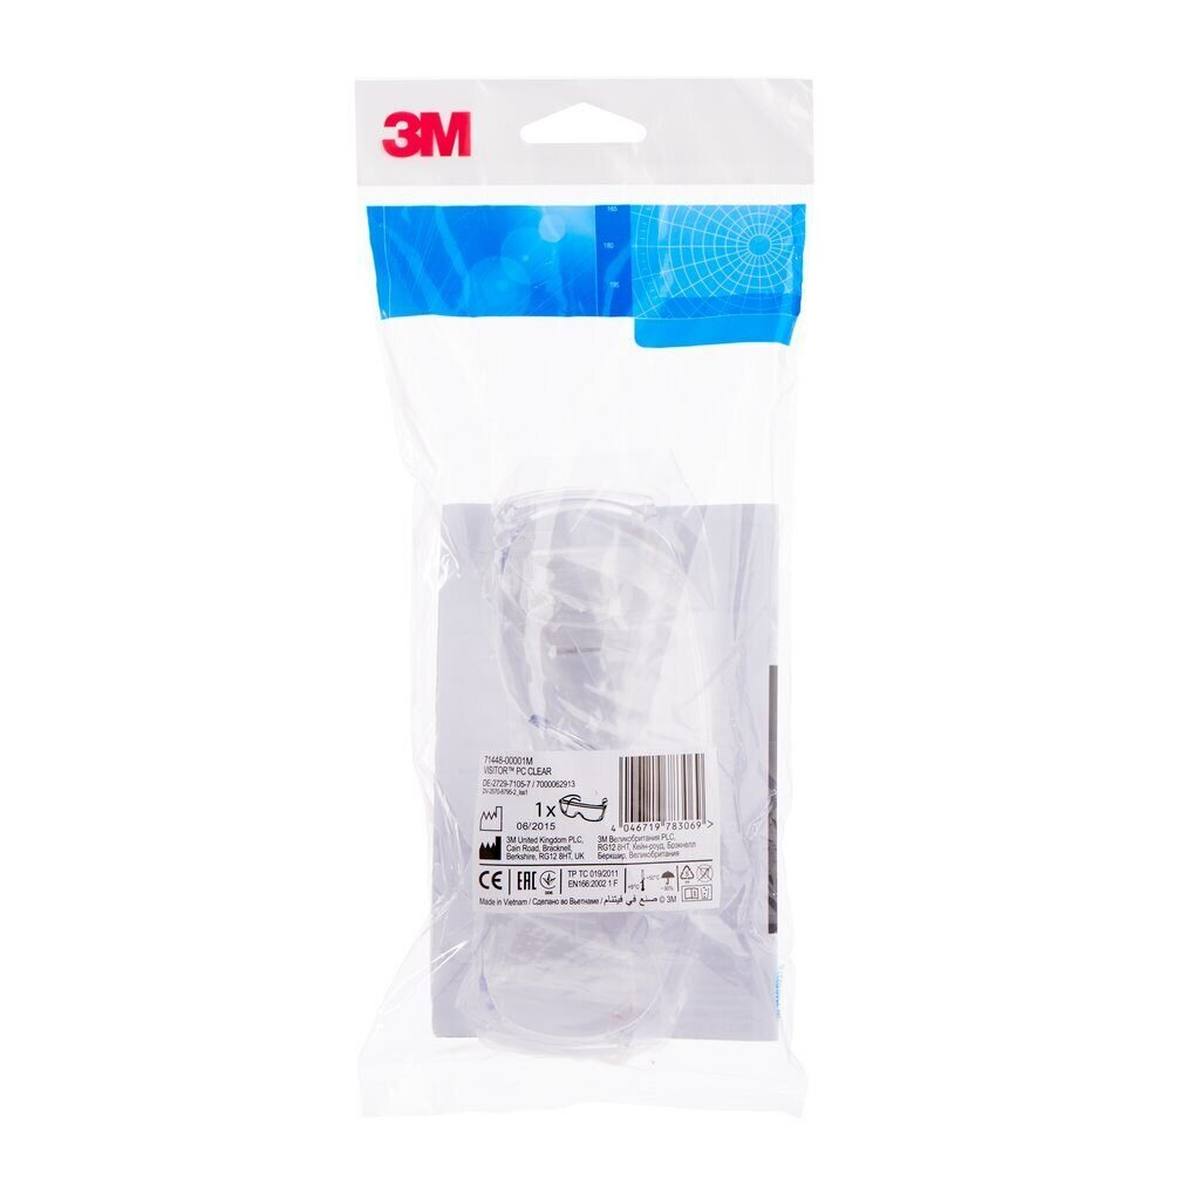 3M Visitor safety goggles UV, PC, clear, transparent frame